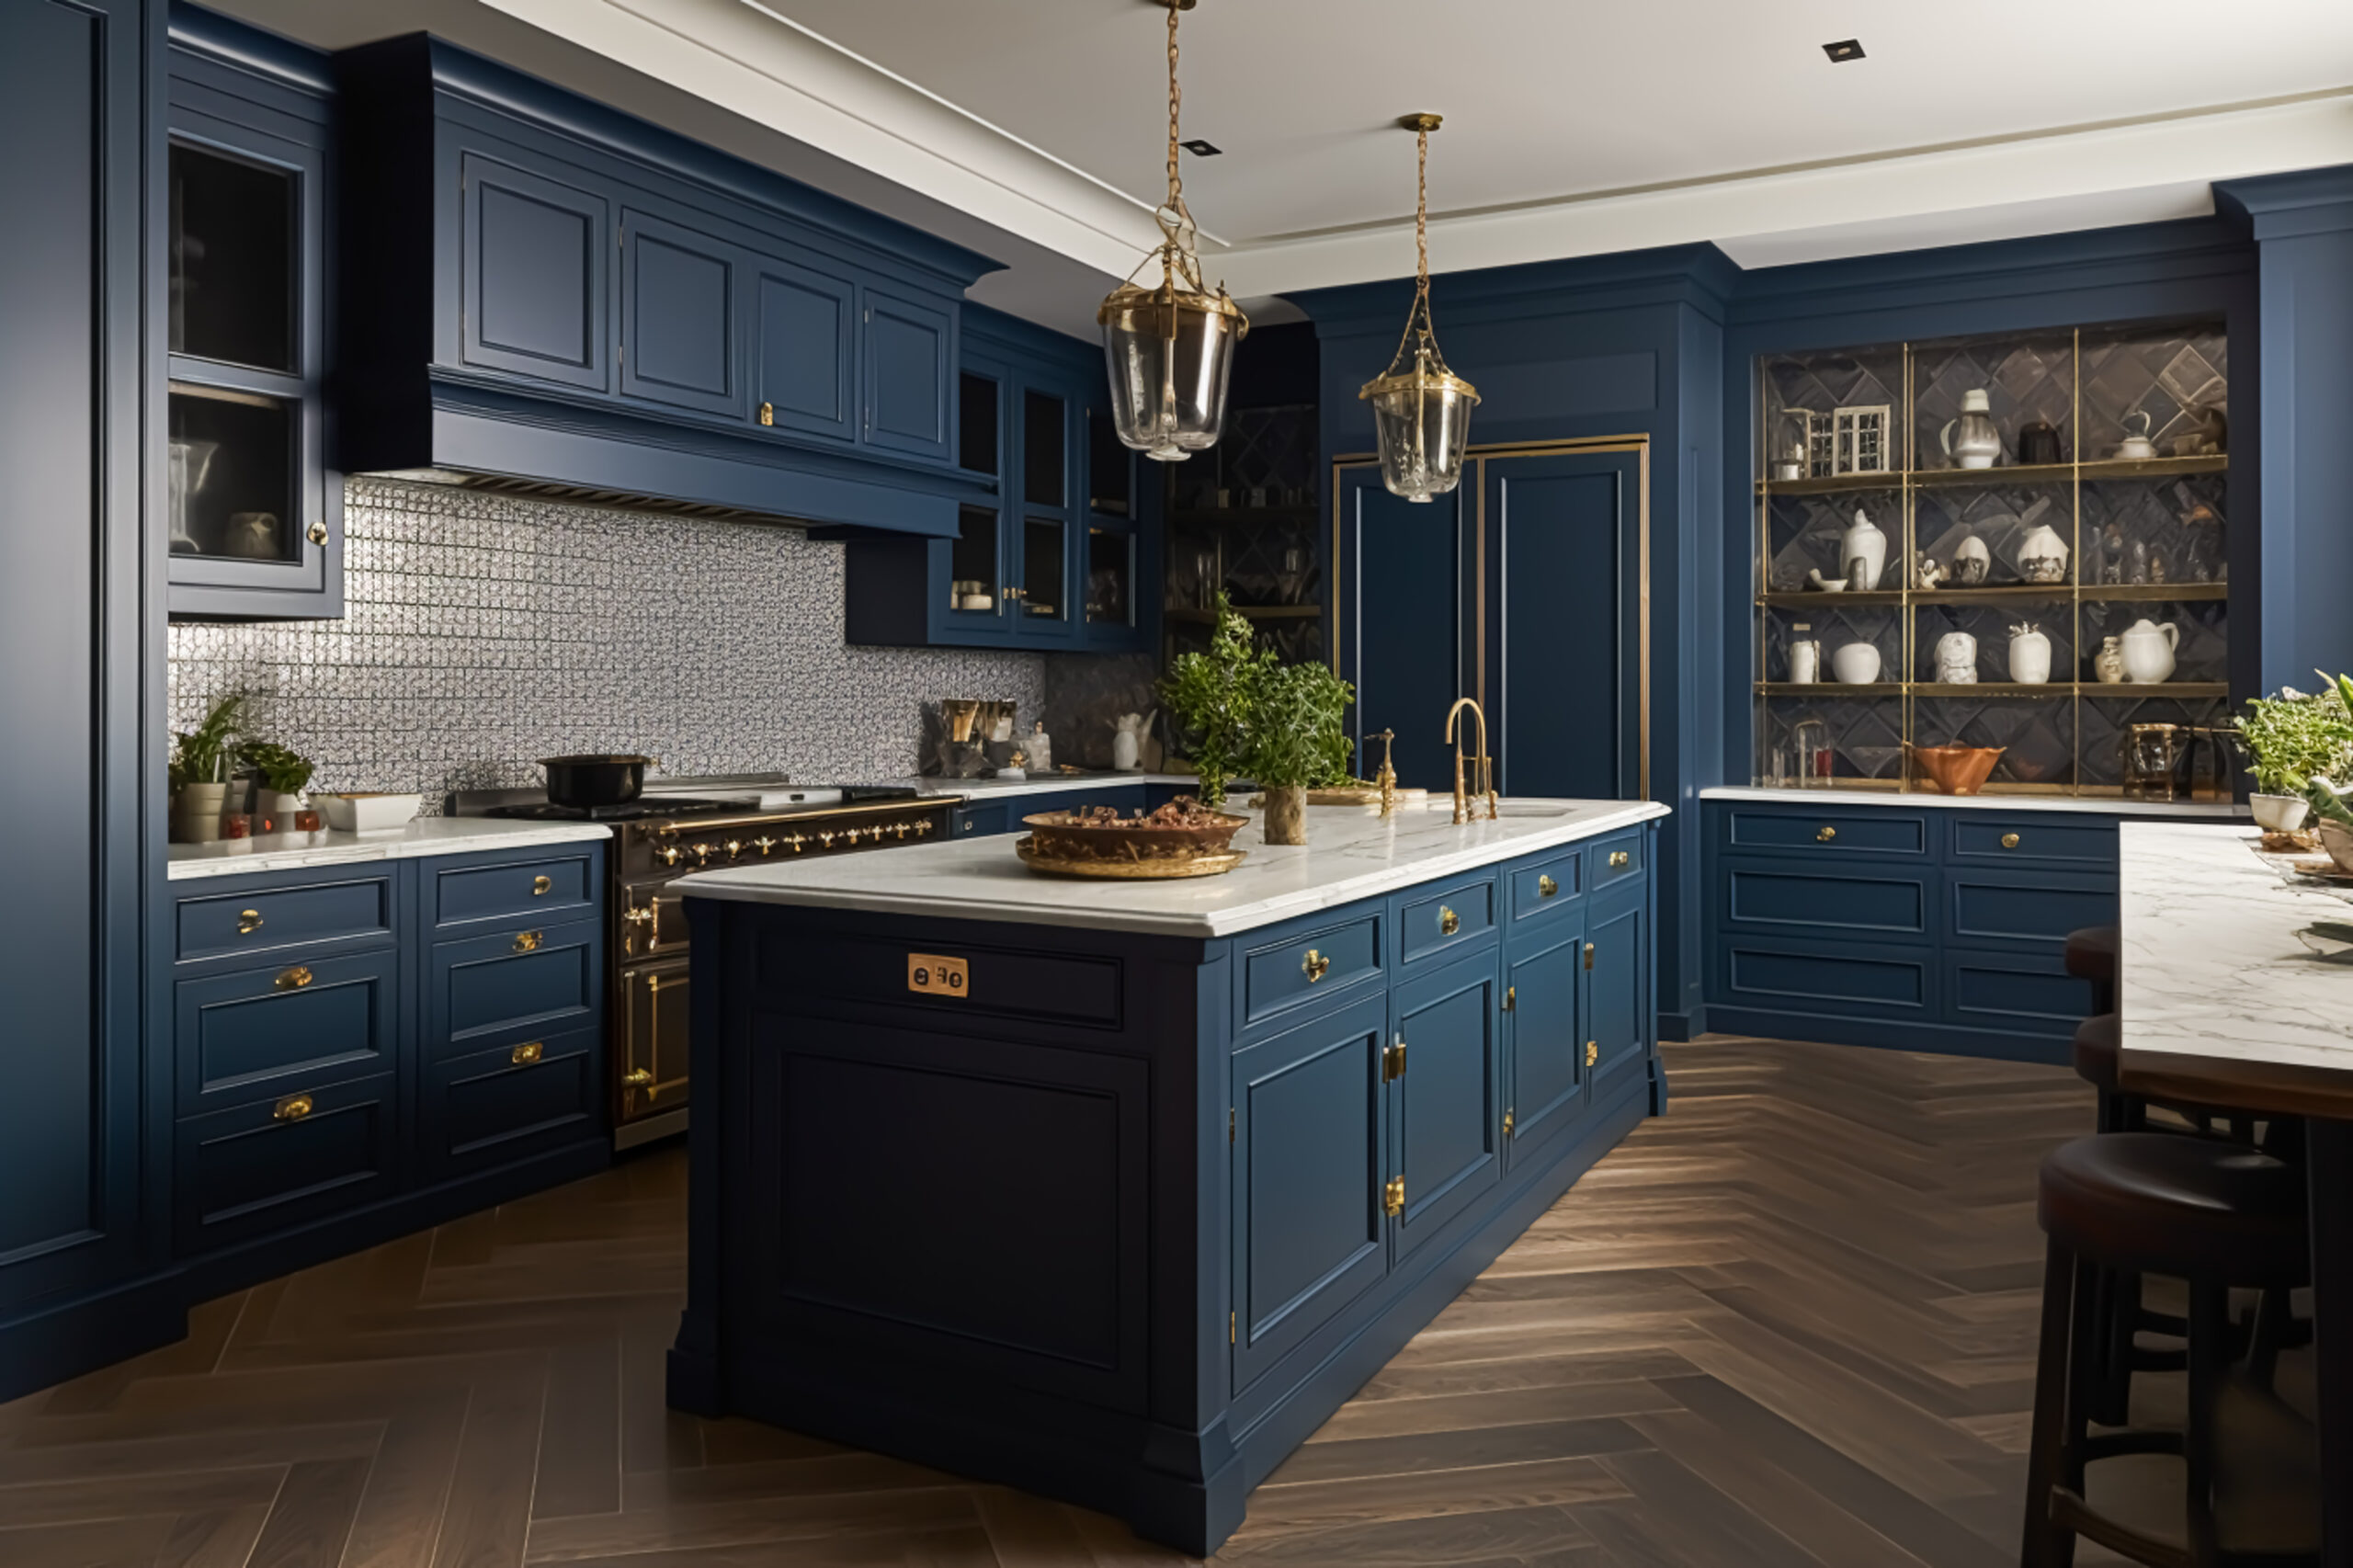 Dark blue kitchen decor, interior design and house improvement, classic English in frame kitchen cabinets, countertop and applience in a country house, post-processed, 3-d design, renovation